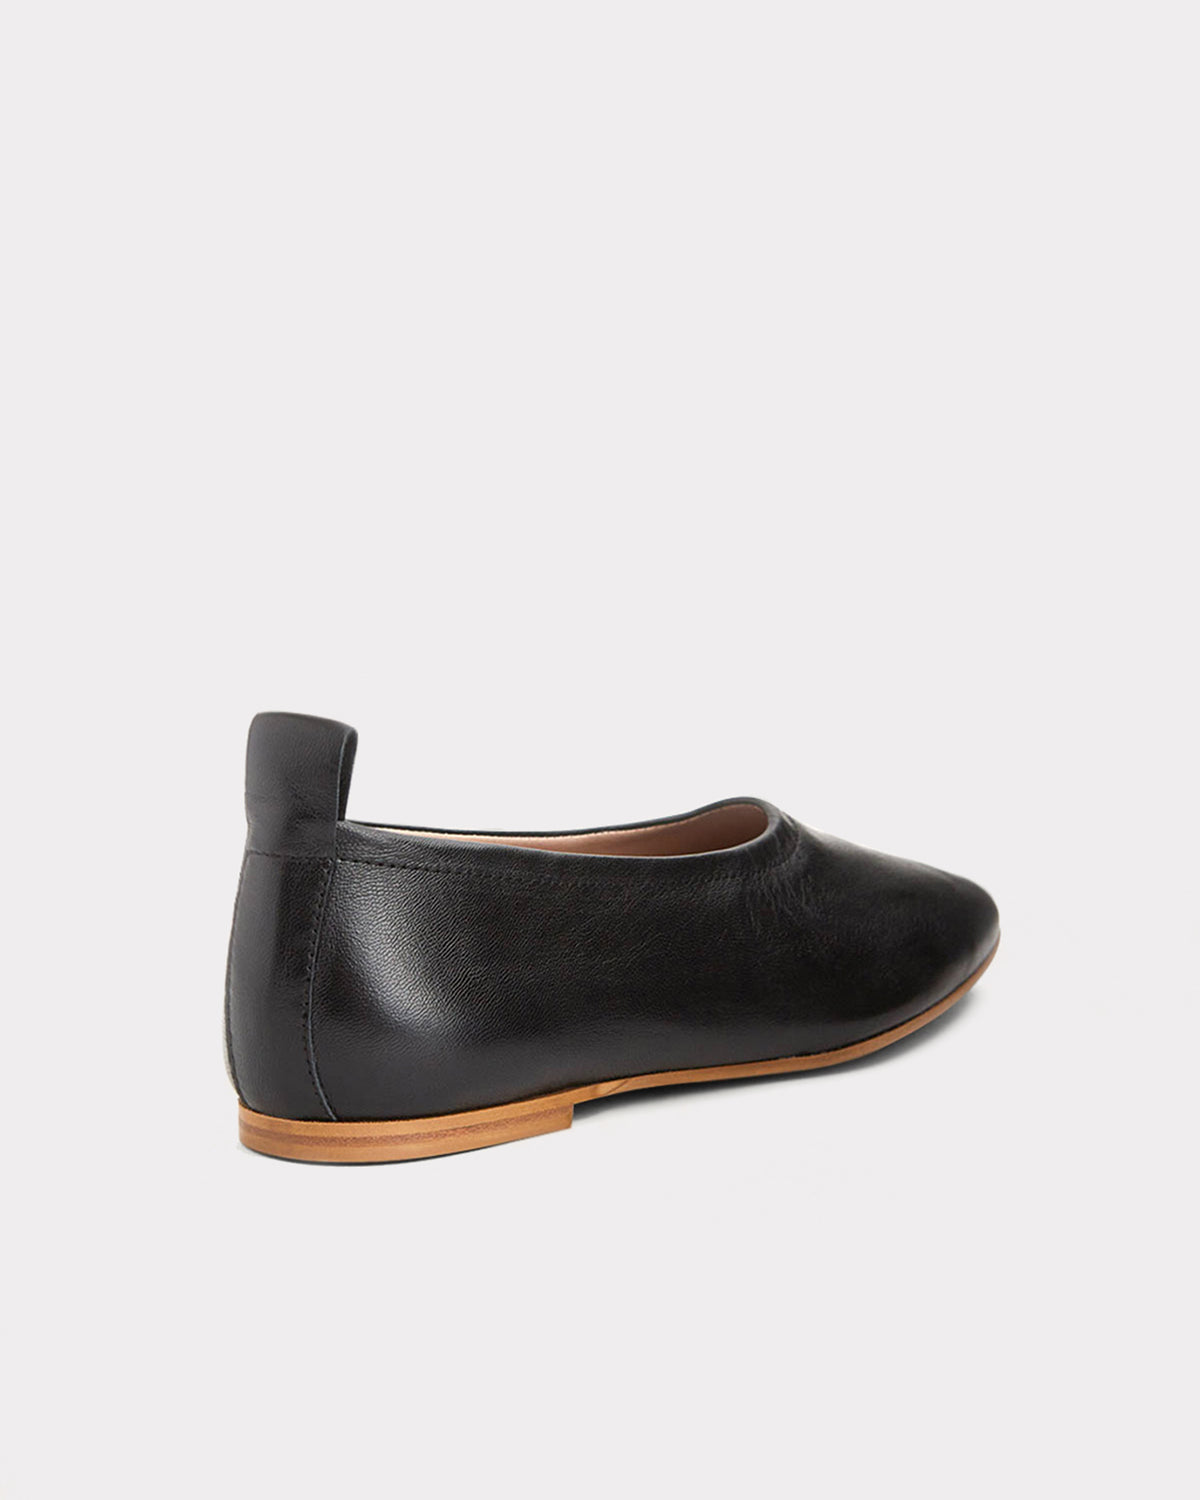 ethically sourced black leather slippers